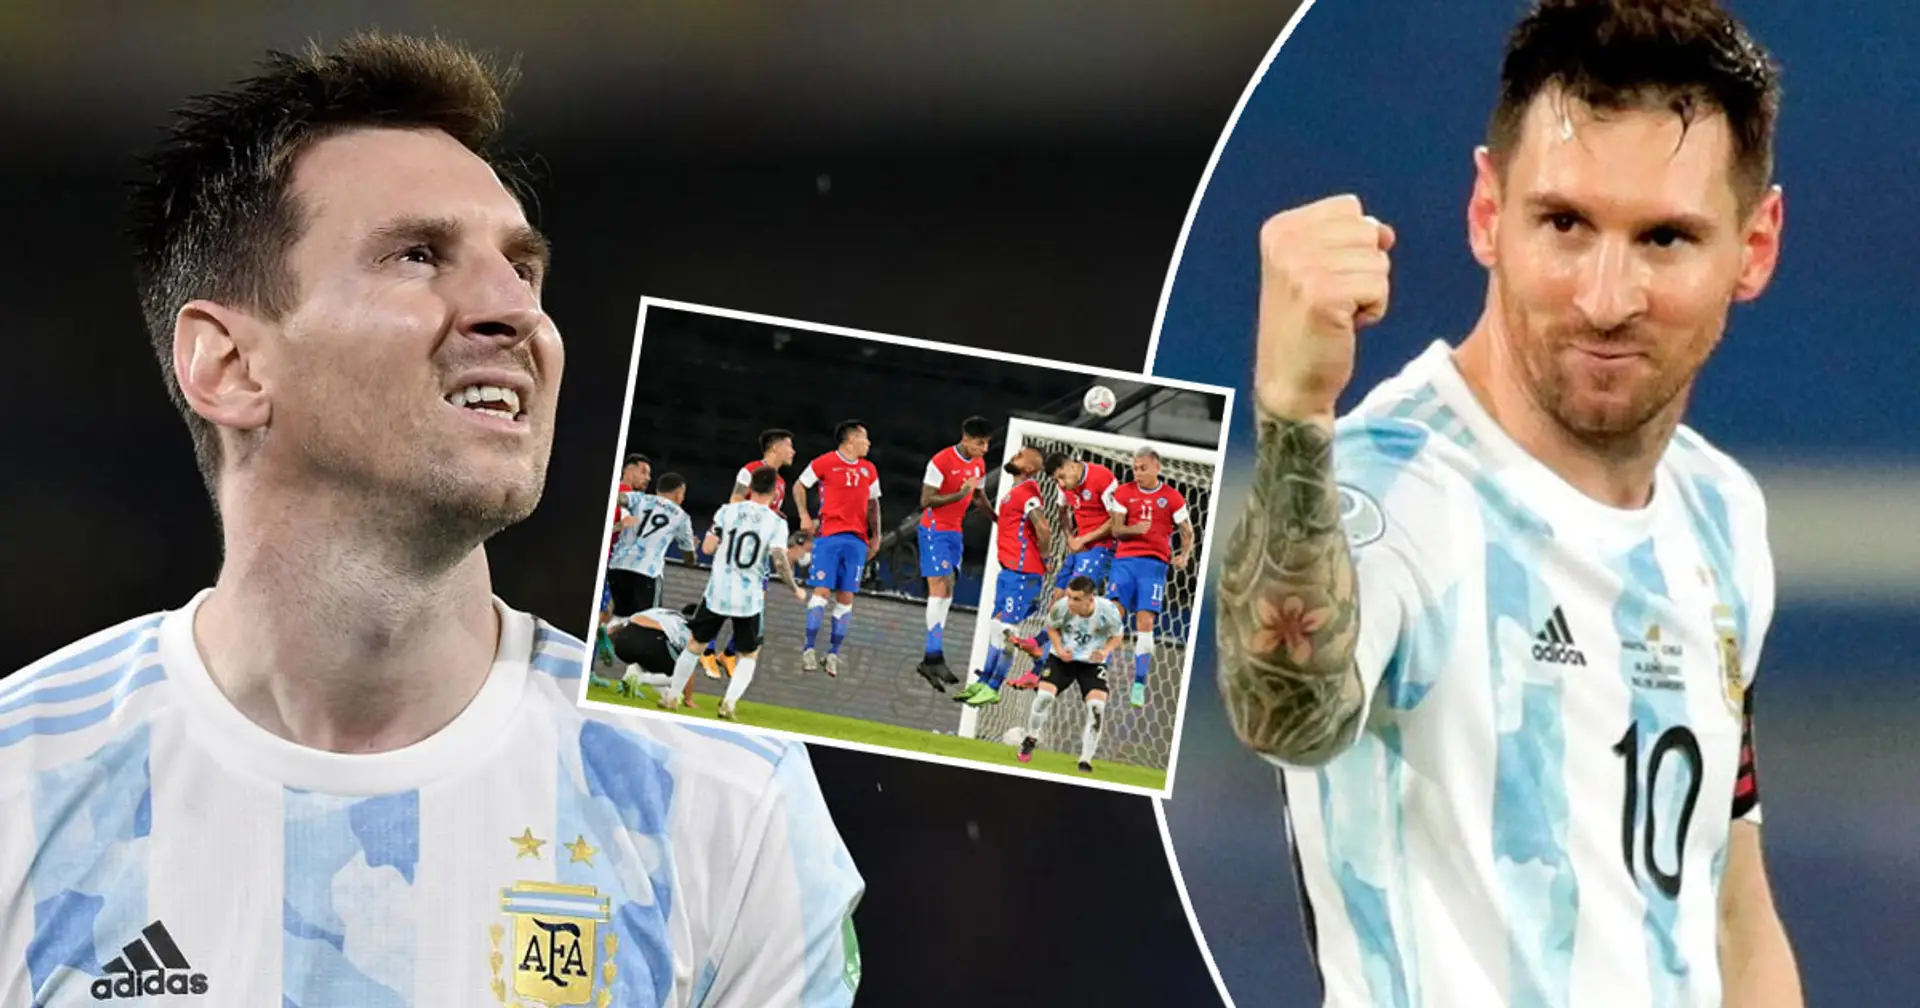 Messi scores free-kick stunner but Argentina unable to beat Chile in Copa America opener